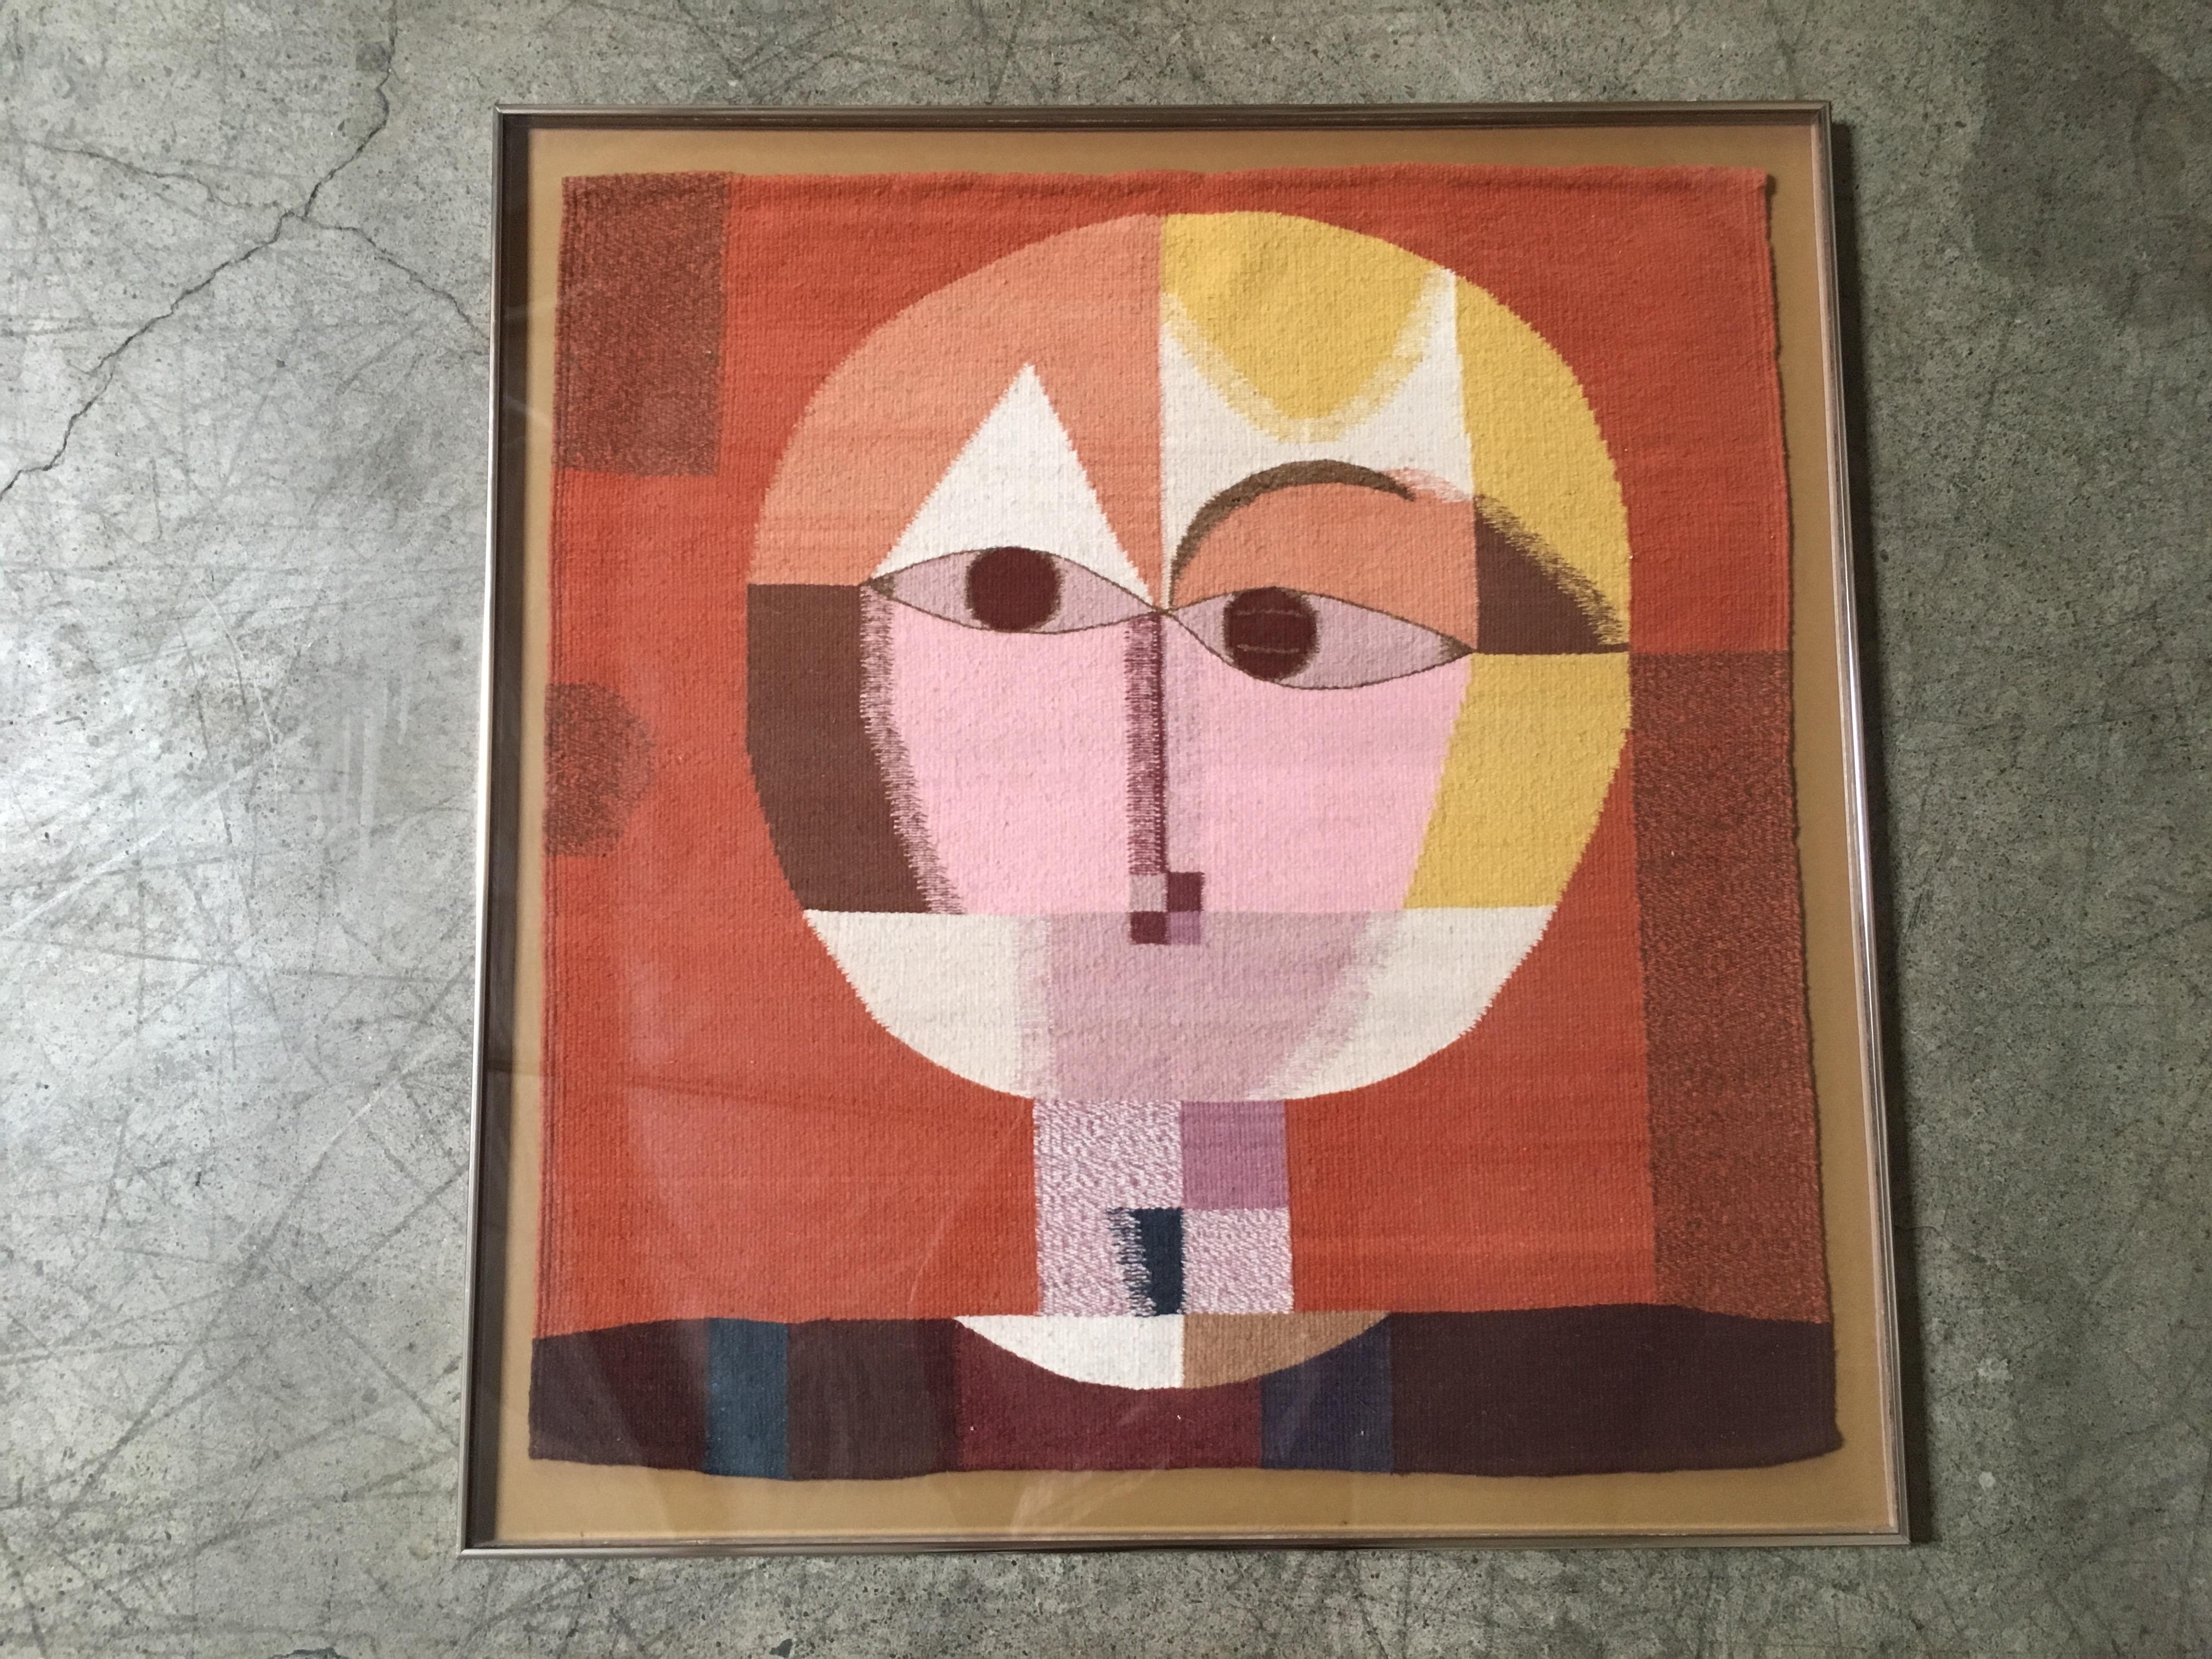 This is a weaving from Oaxaca Mexico taken from Paul Klee titled (Senecio). Framed with Lucite and metal.